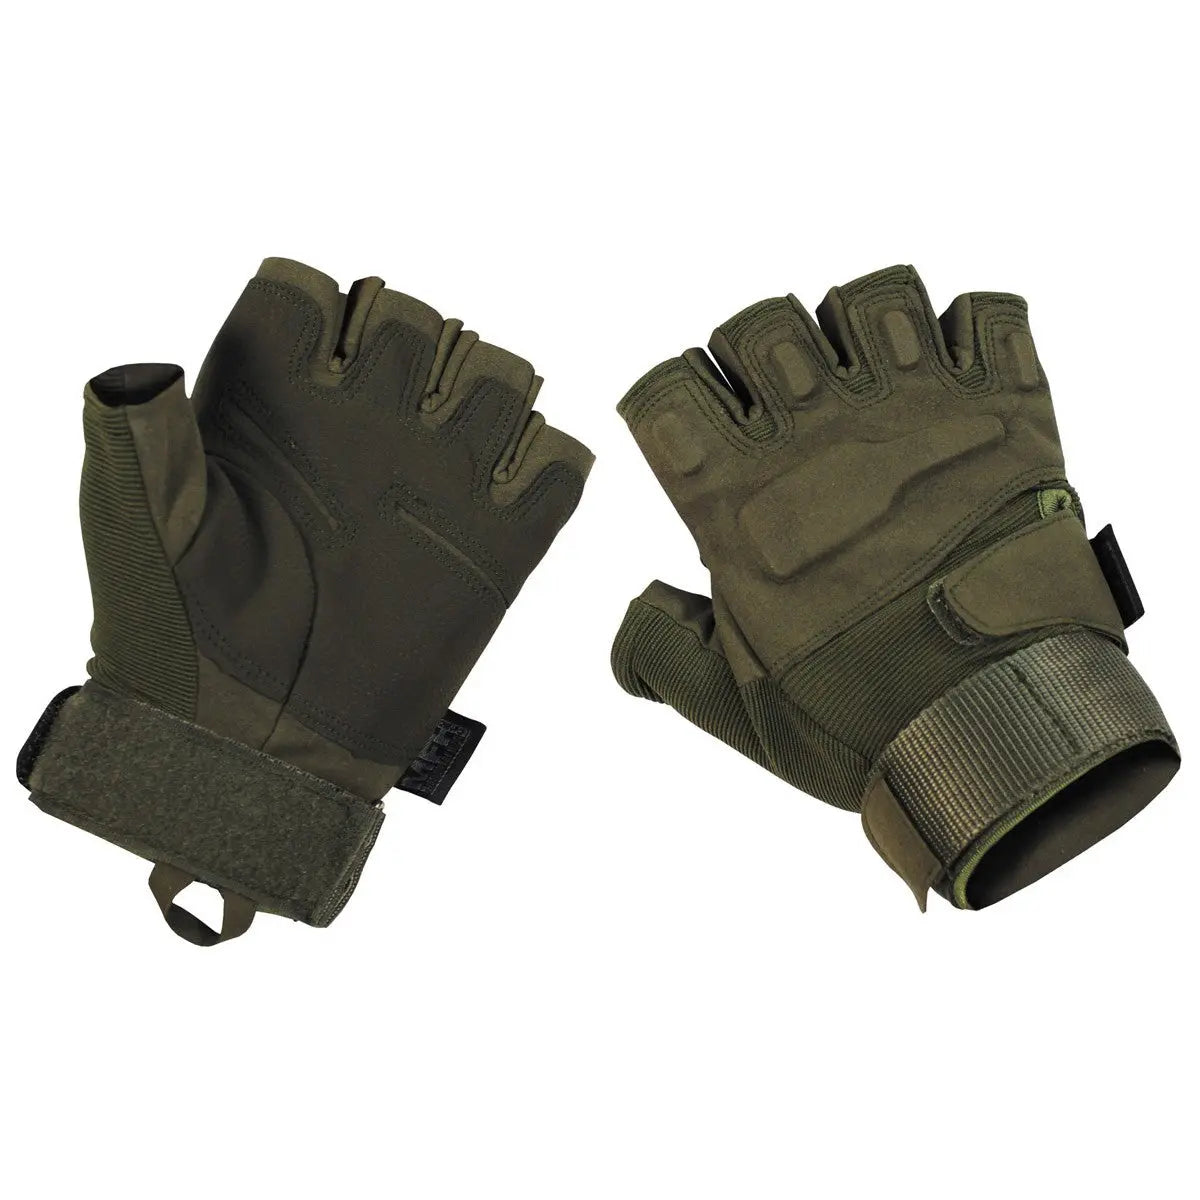 Tactical gloves, "Pro", half fingers, olive NSO Gear gloves